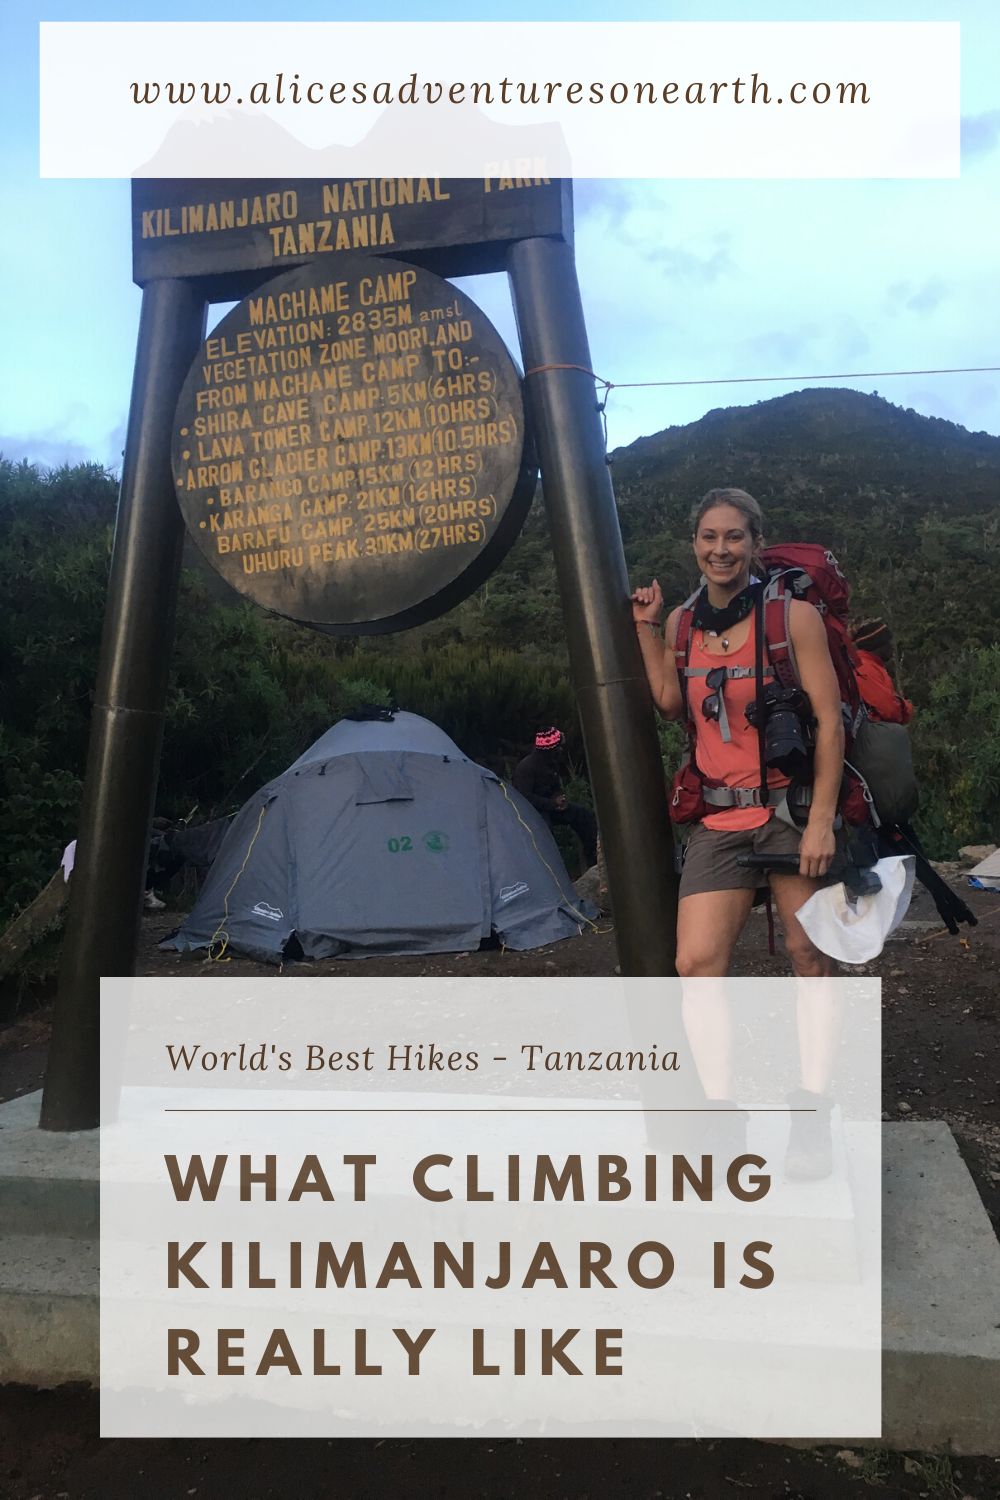 Climbing Mount Kilimanjaro in Tanzania. One of the 7 Summits which many people attempt every year. Here is the real story of how challenging this 7 day climb up the Machame route really is. #Travel #climbing #africa